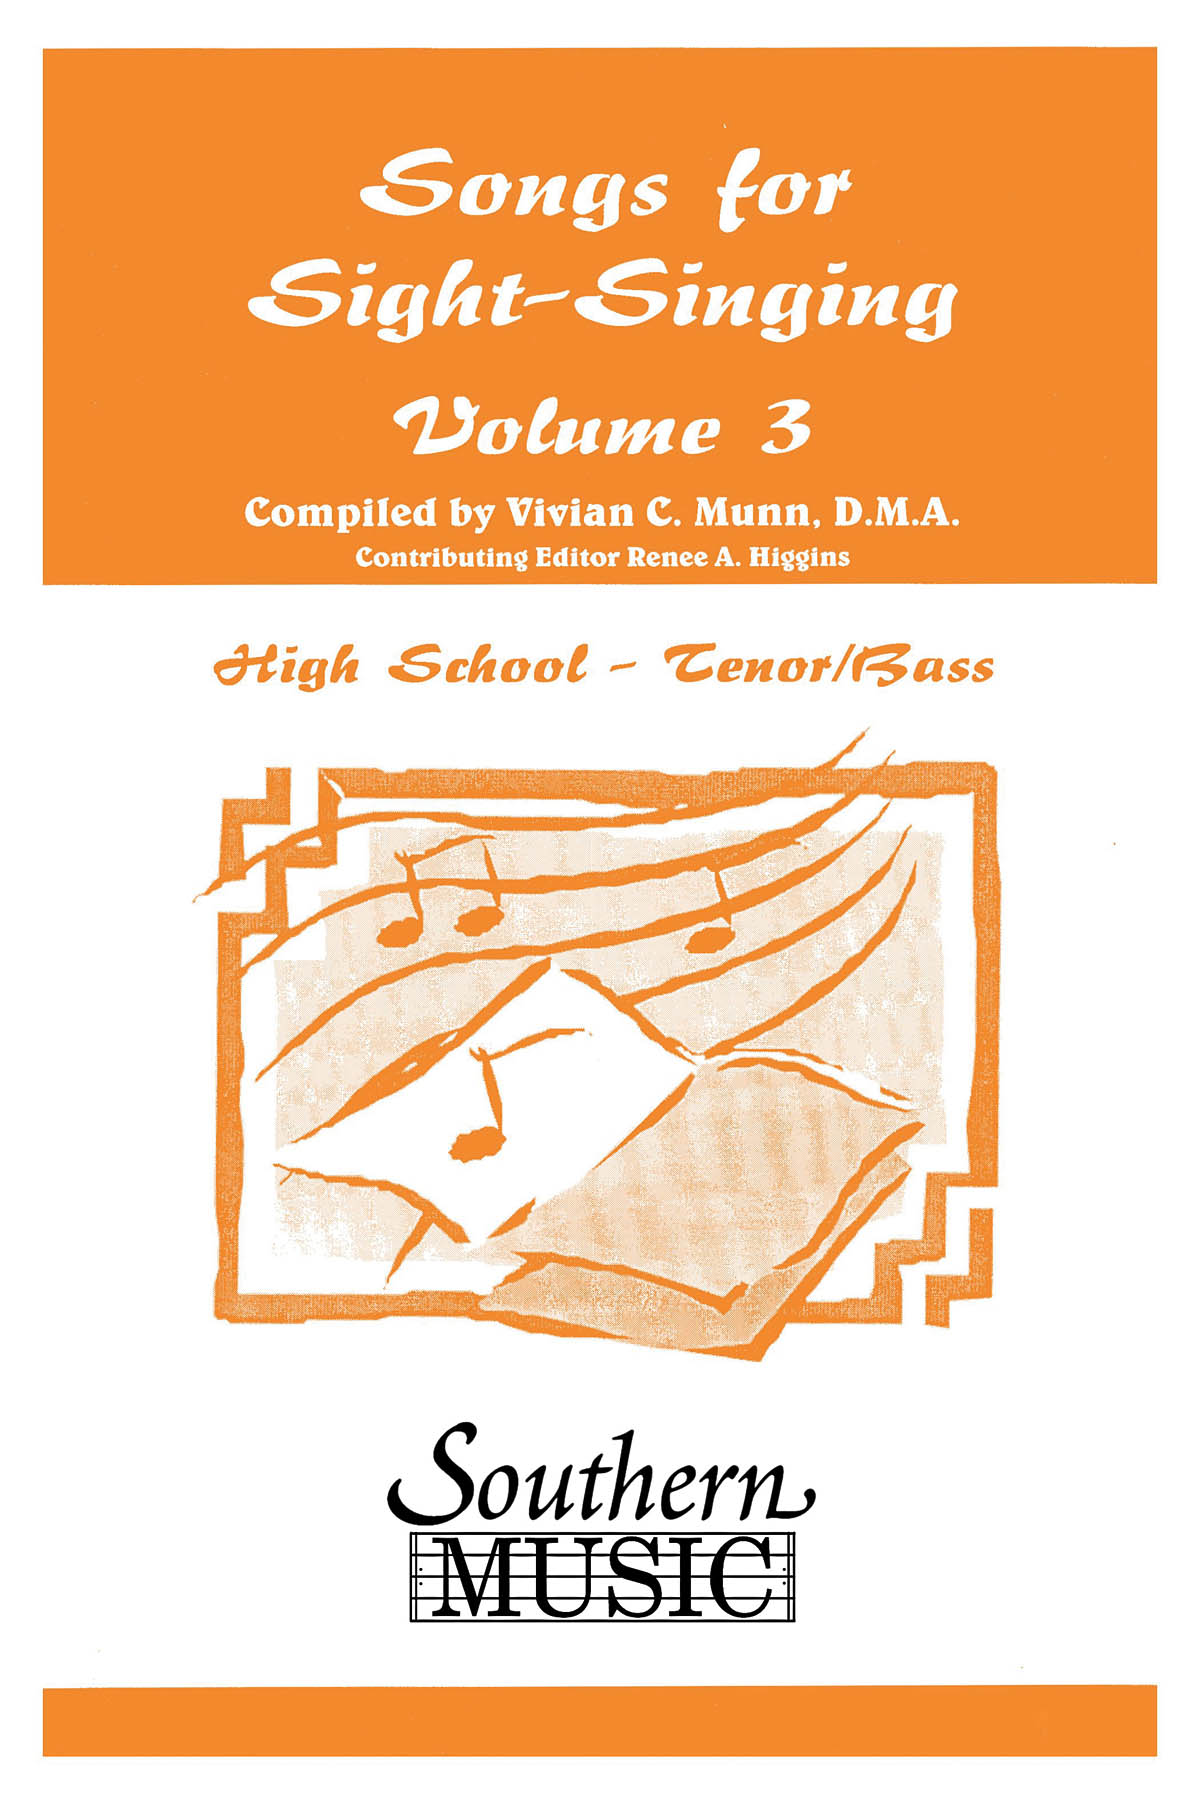 Bobby Siltman: Songs for Sight Singing- Volume 3: Lower Voices a Cappella: